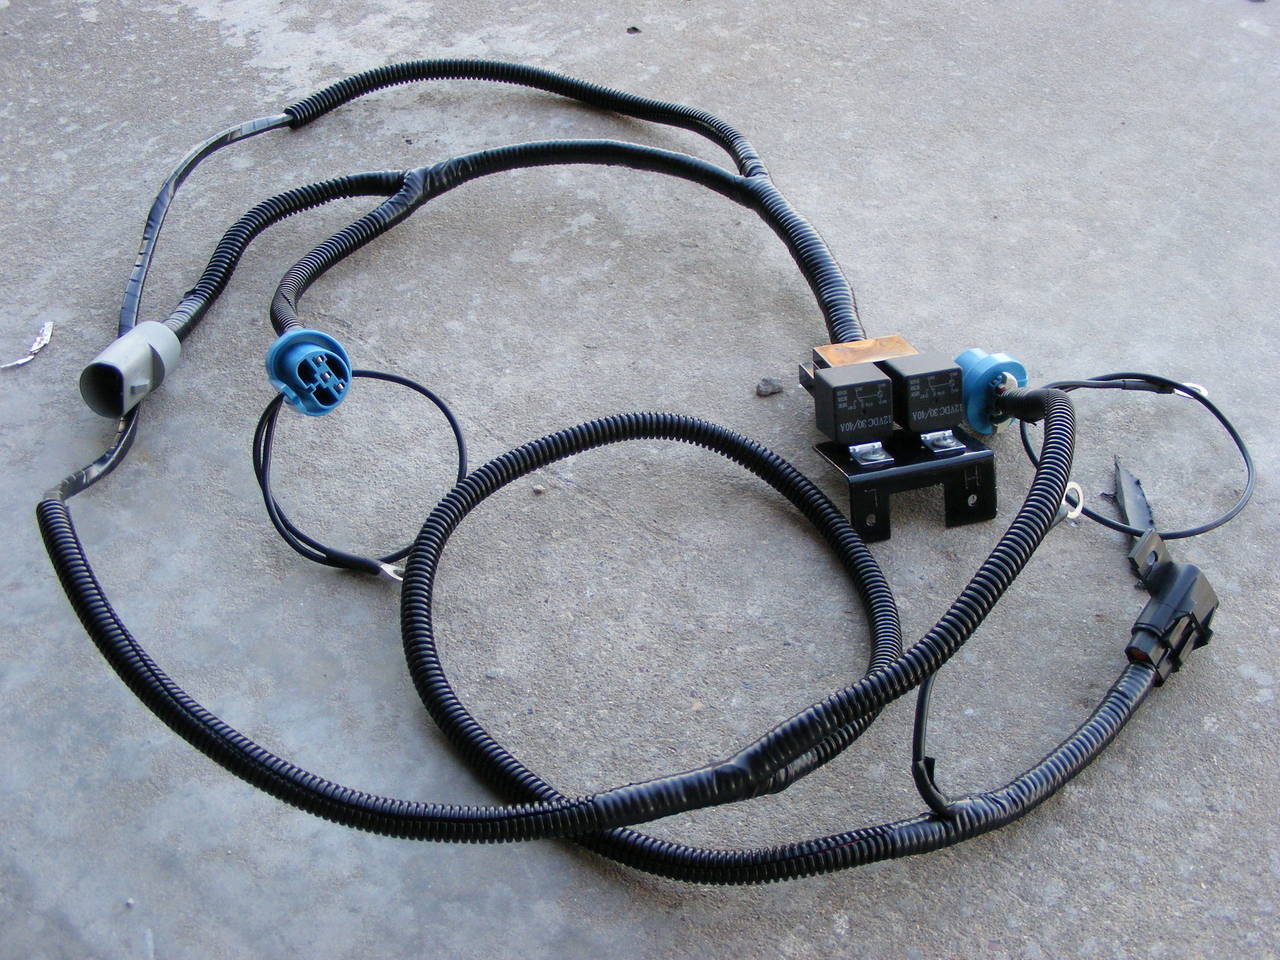 Completed wiring harness